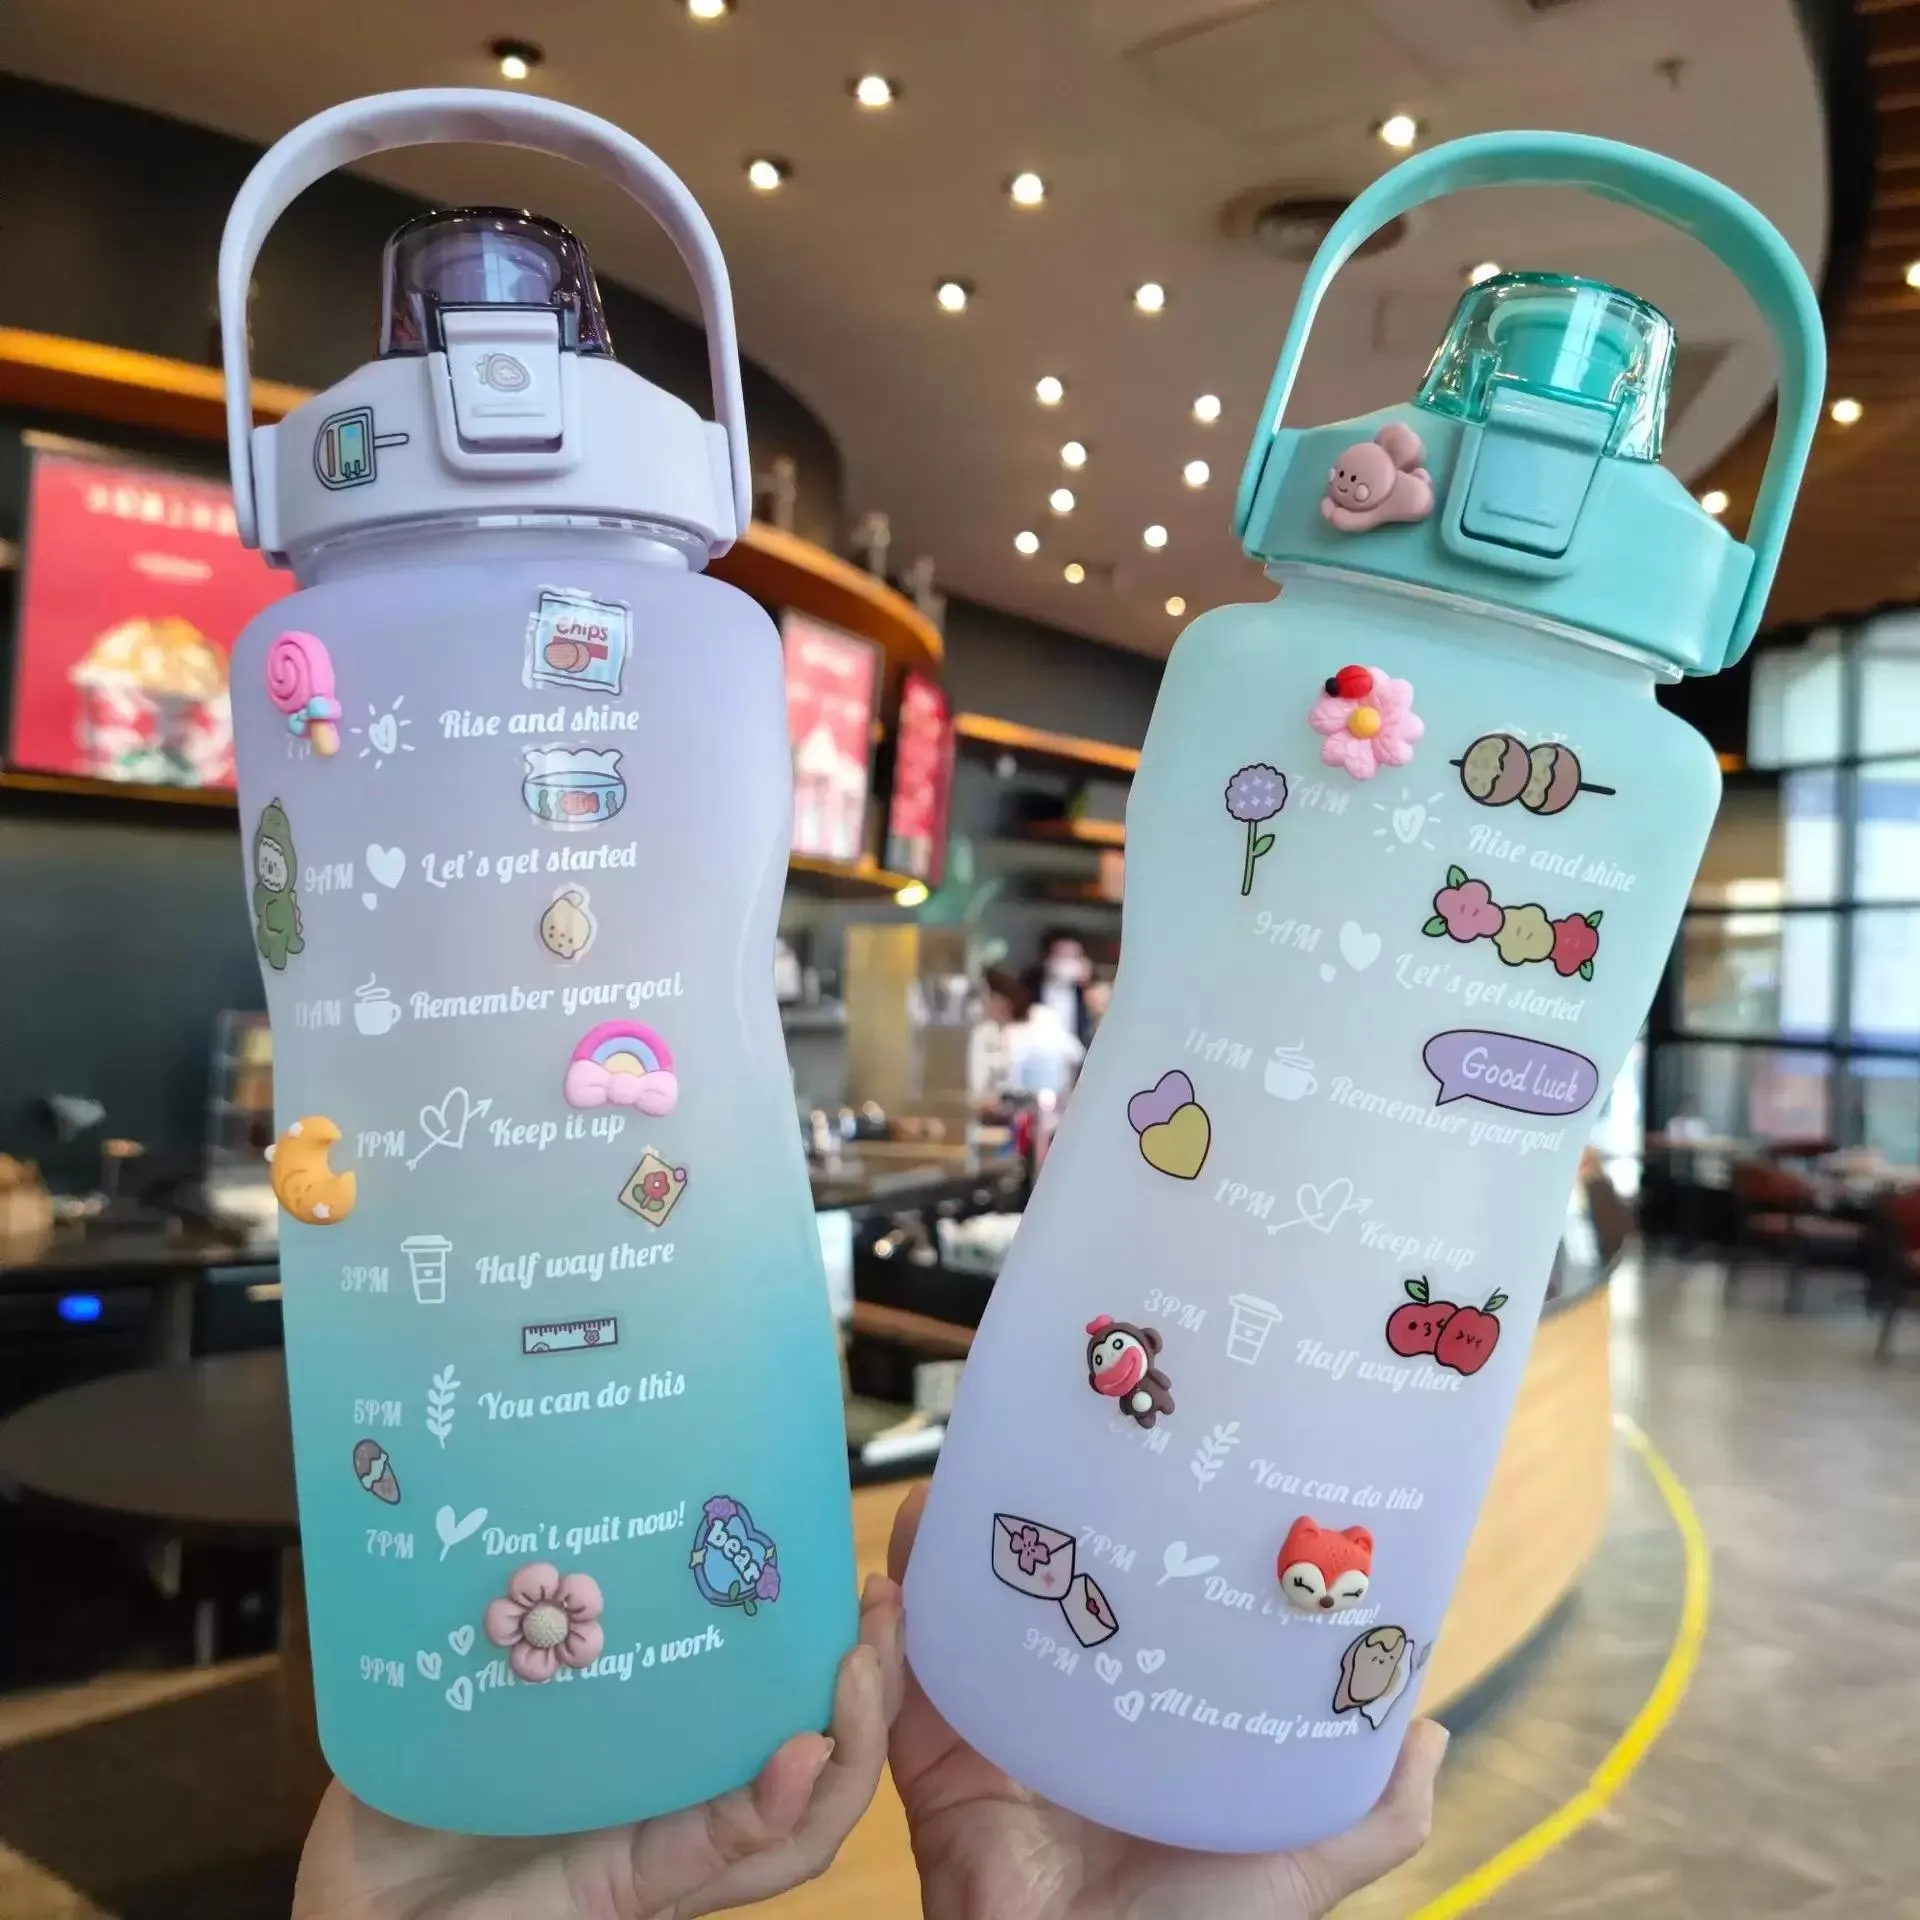 Home Tune 14oz Kids Tumbler Water Drinking Cup 2 Pack - BPA Free, Straw Lid Cup, Reusable, Lightweight, Spill-Proof Water Bottle with Cute Design